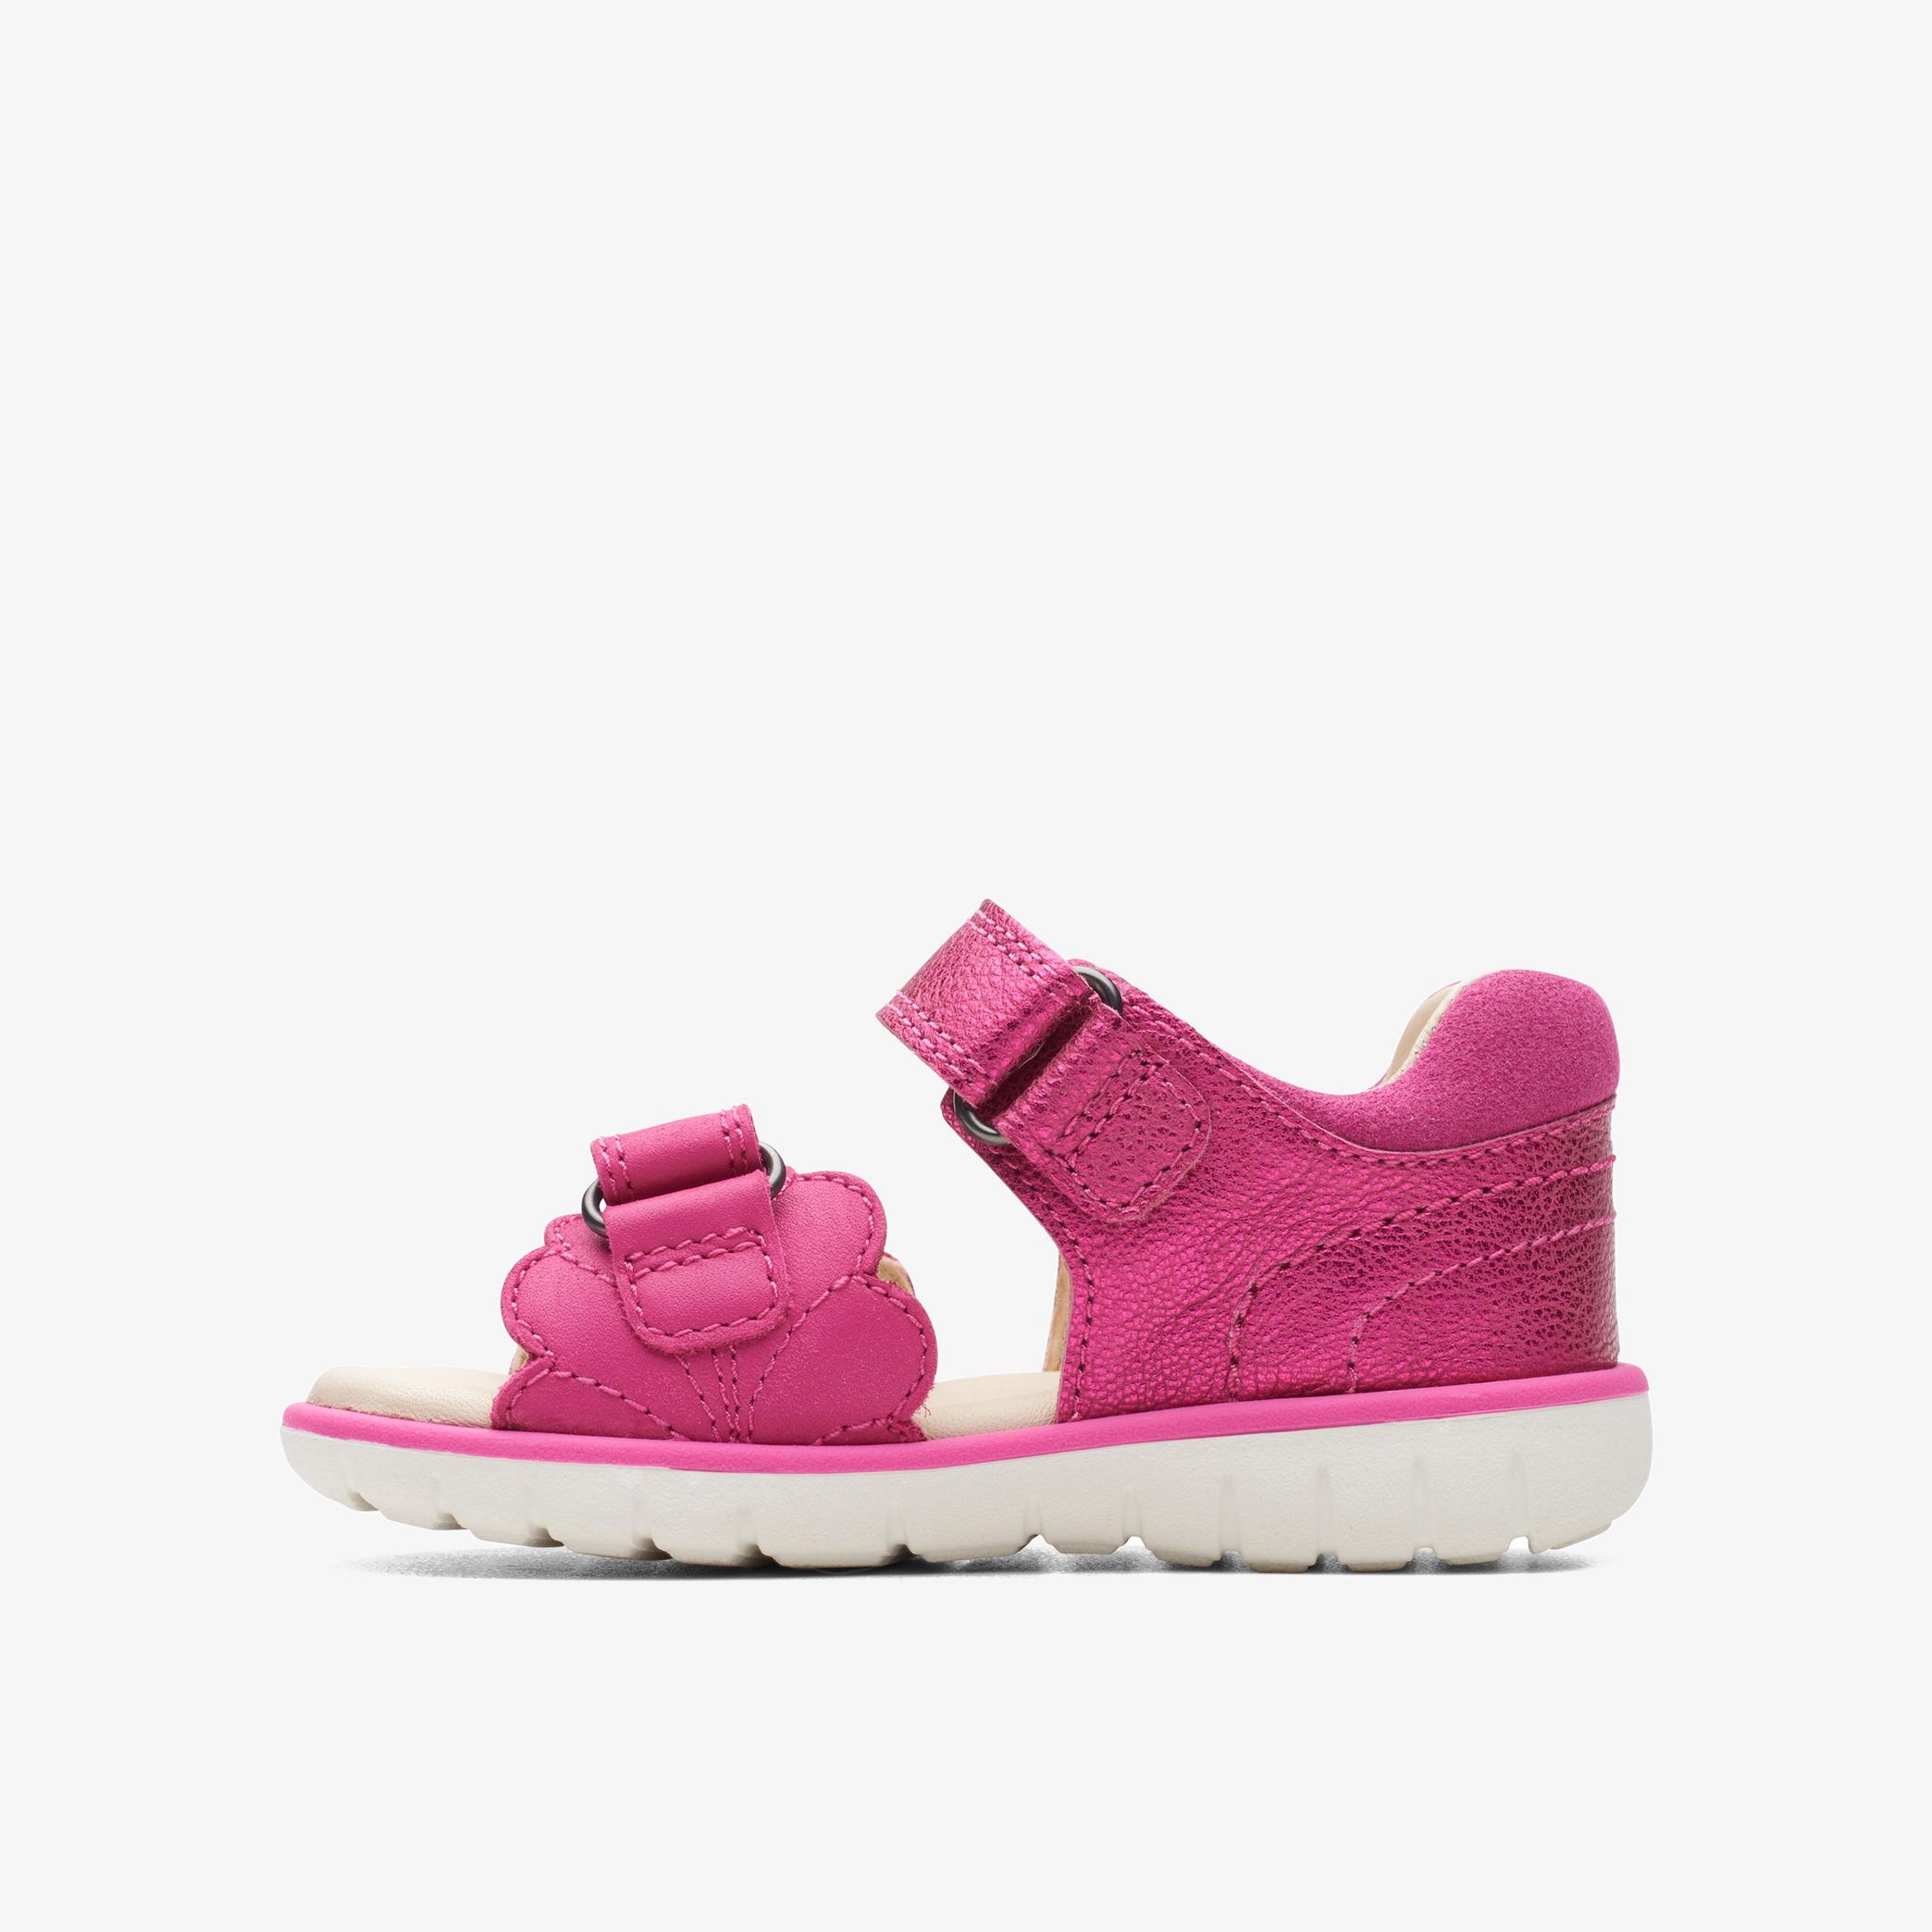 Roam Wing Toddler Pink Leather Flat Sandals, view 2 of 6